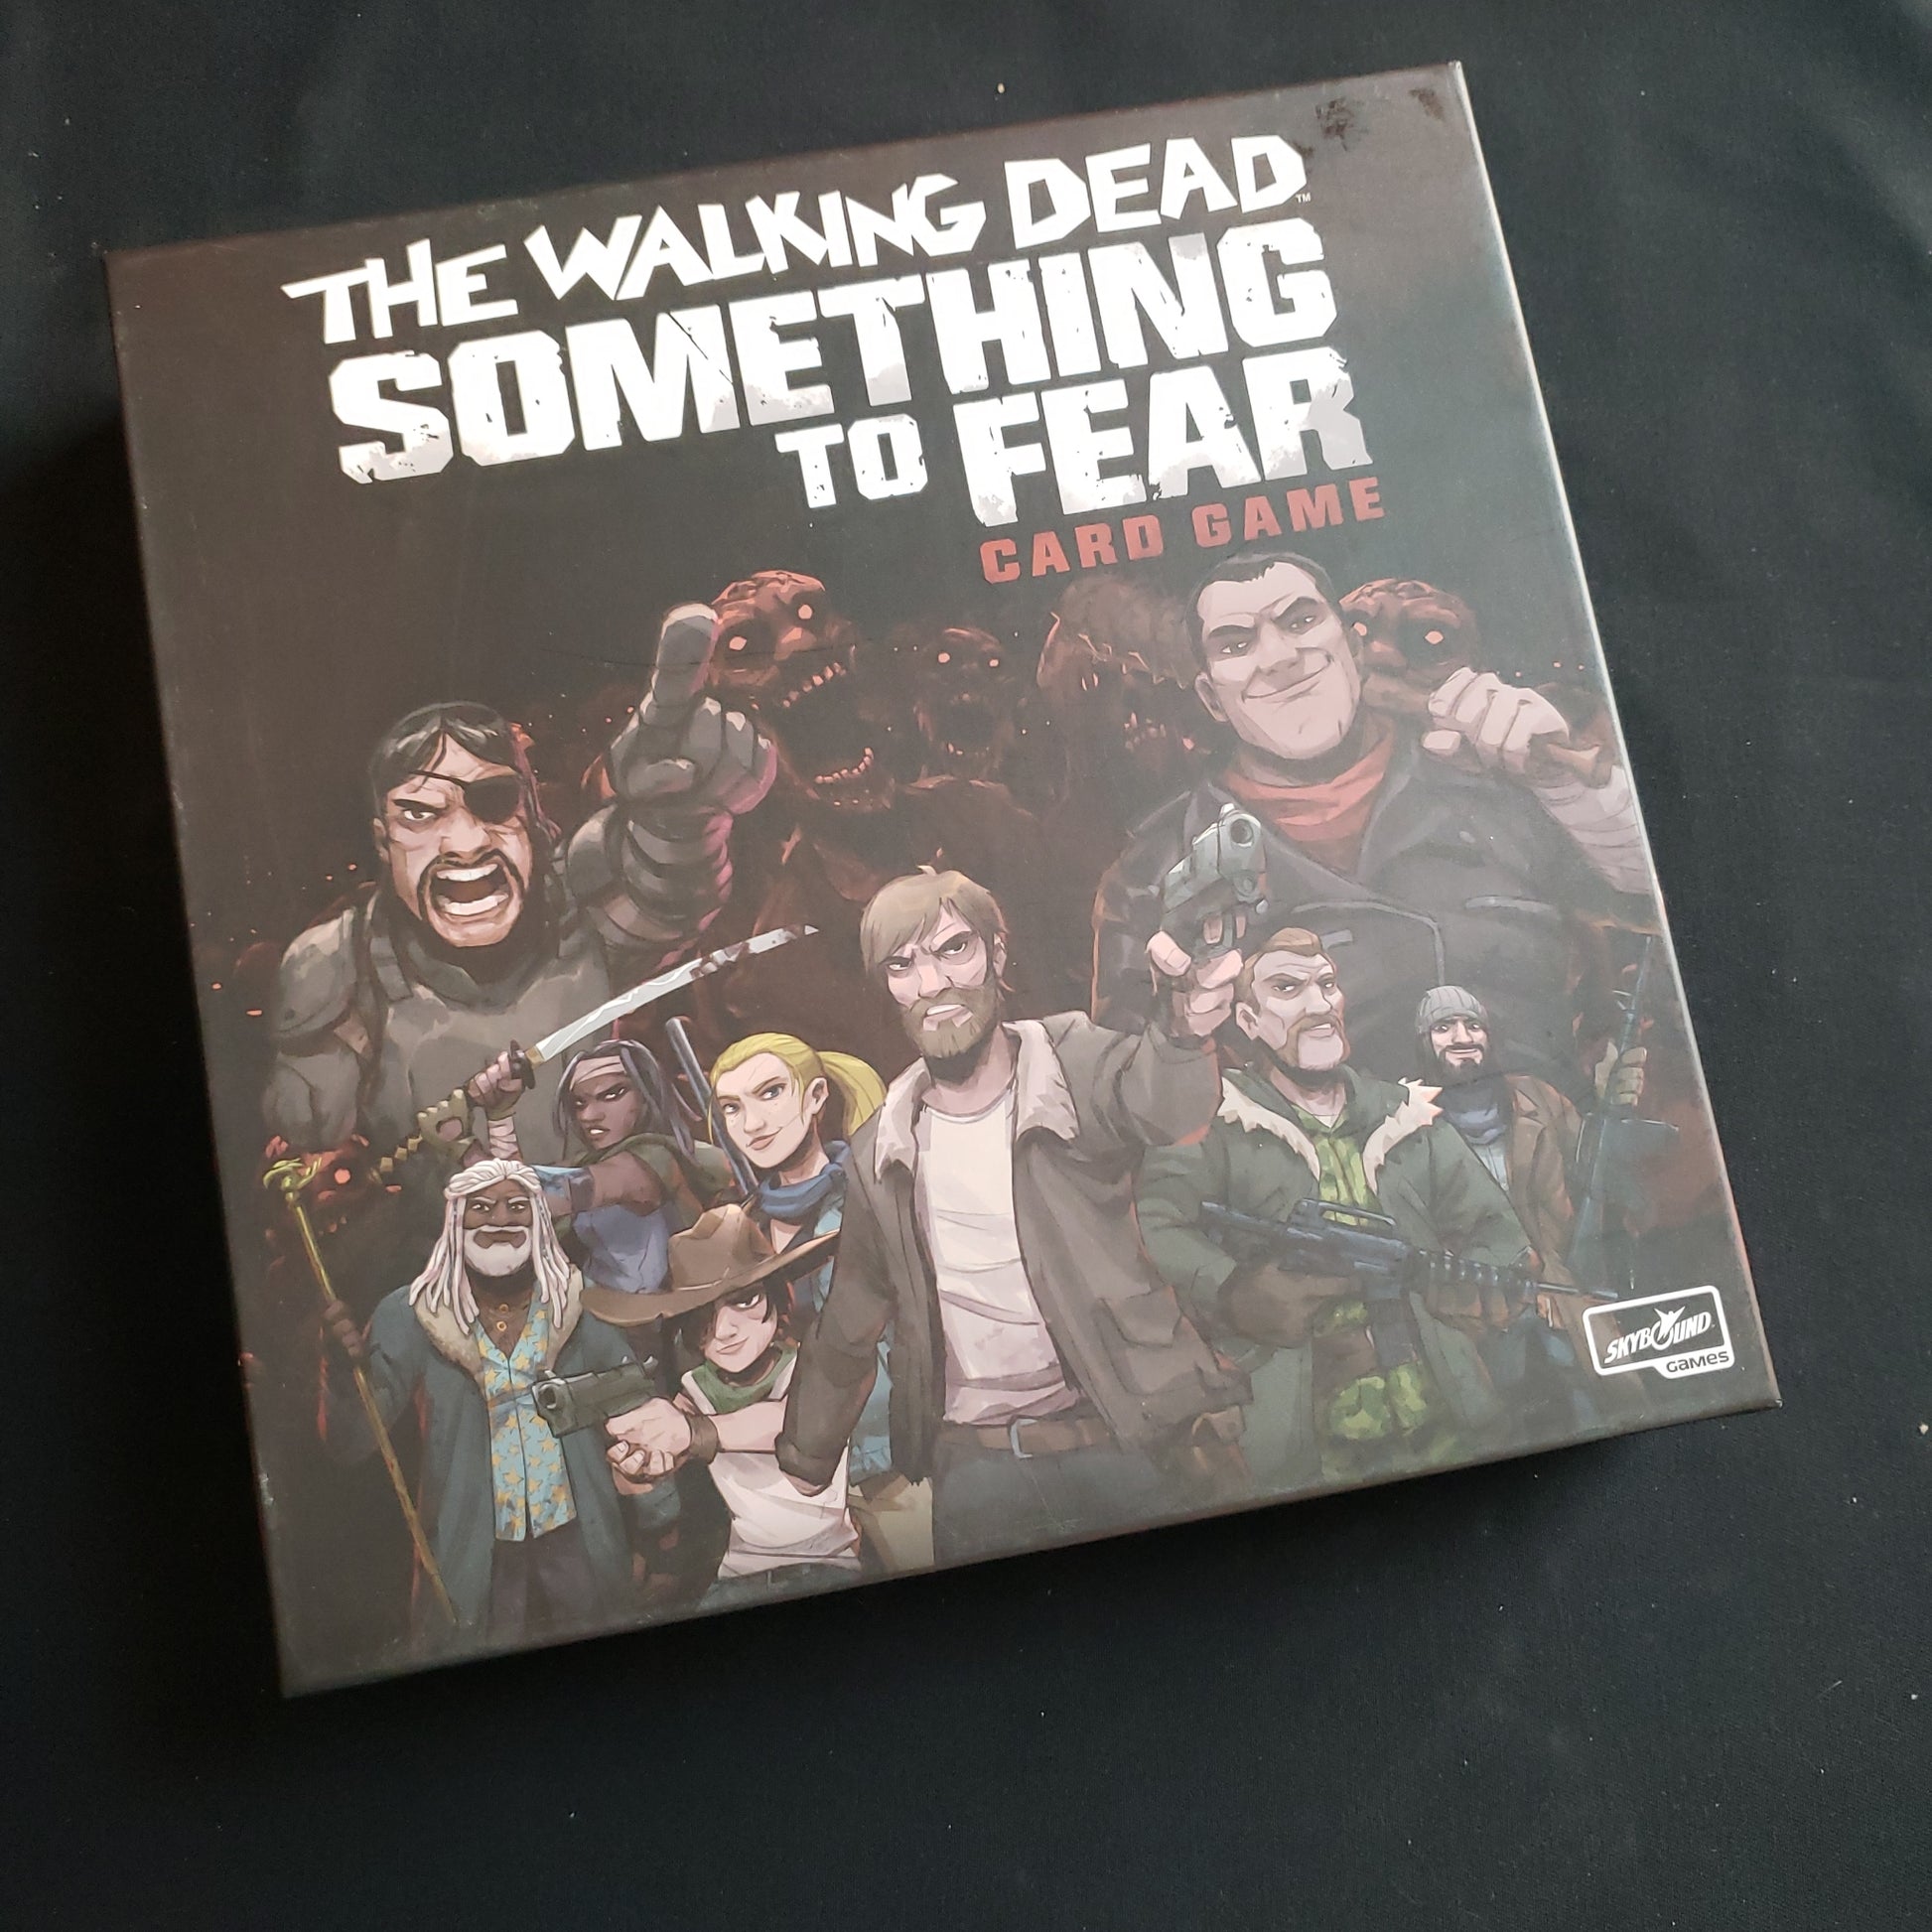 Image shows the front cover of the box of the Walking Dead: Something to Fear card game